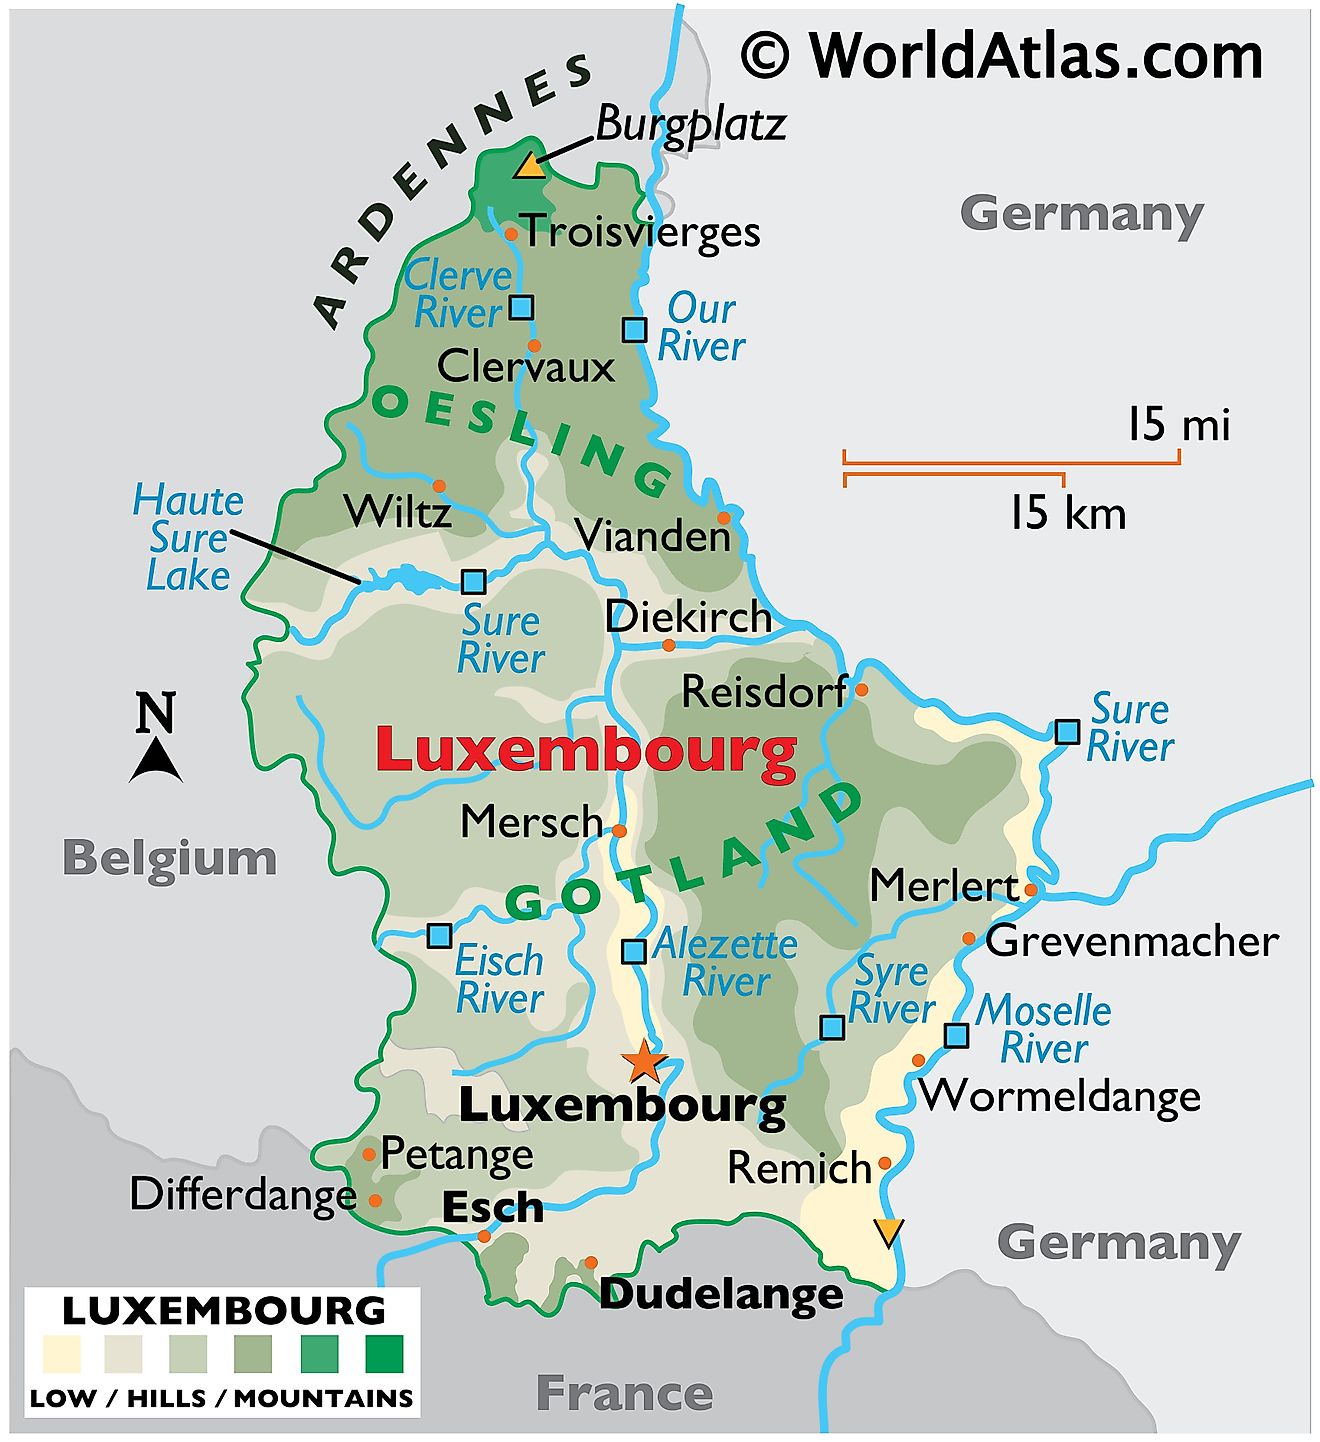 Physical Map of Luxembourg showing terrain, highest and lowest points, major rivers draining the country, important cities, international boundaries, etc.